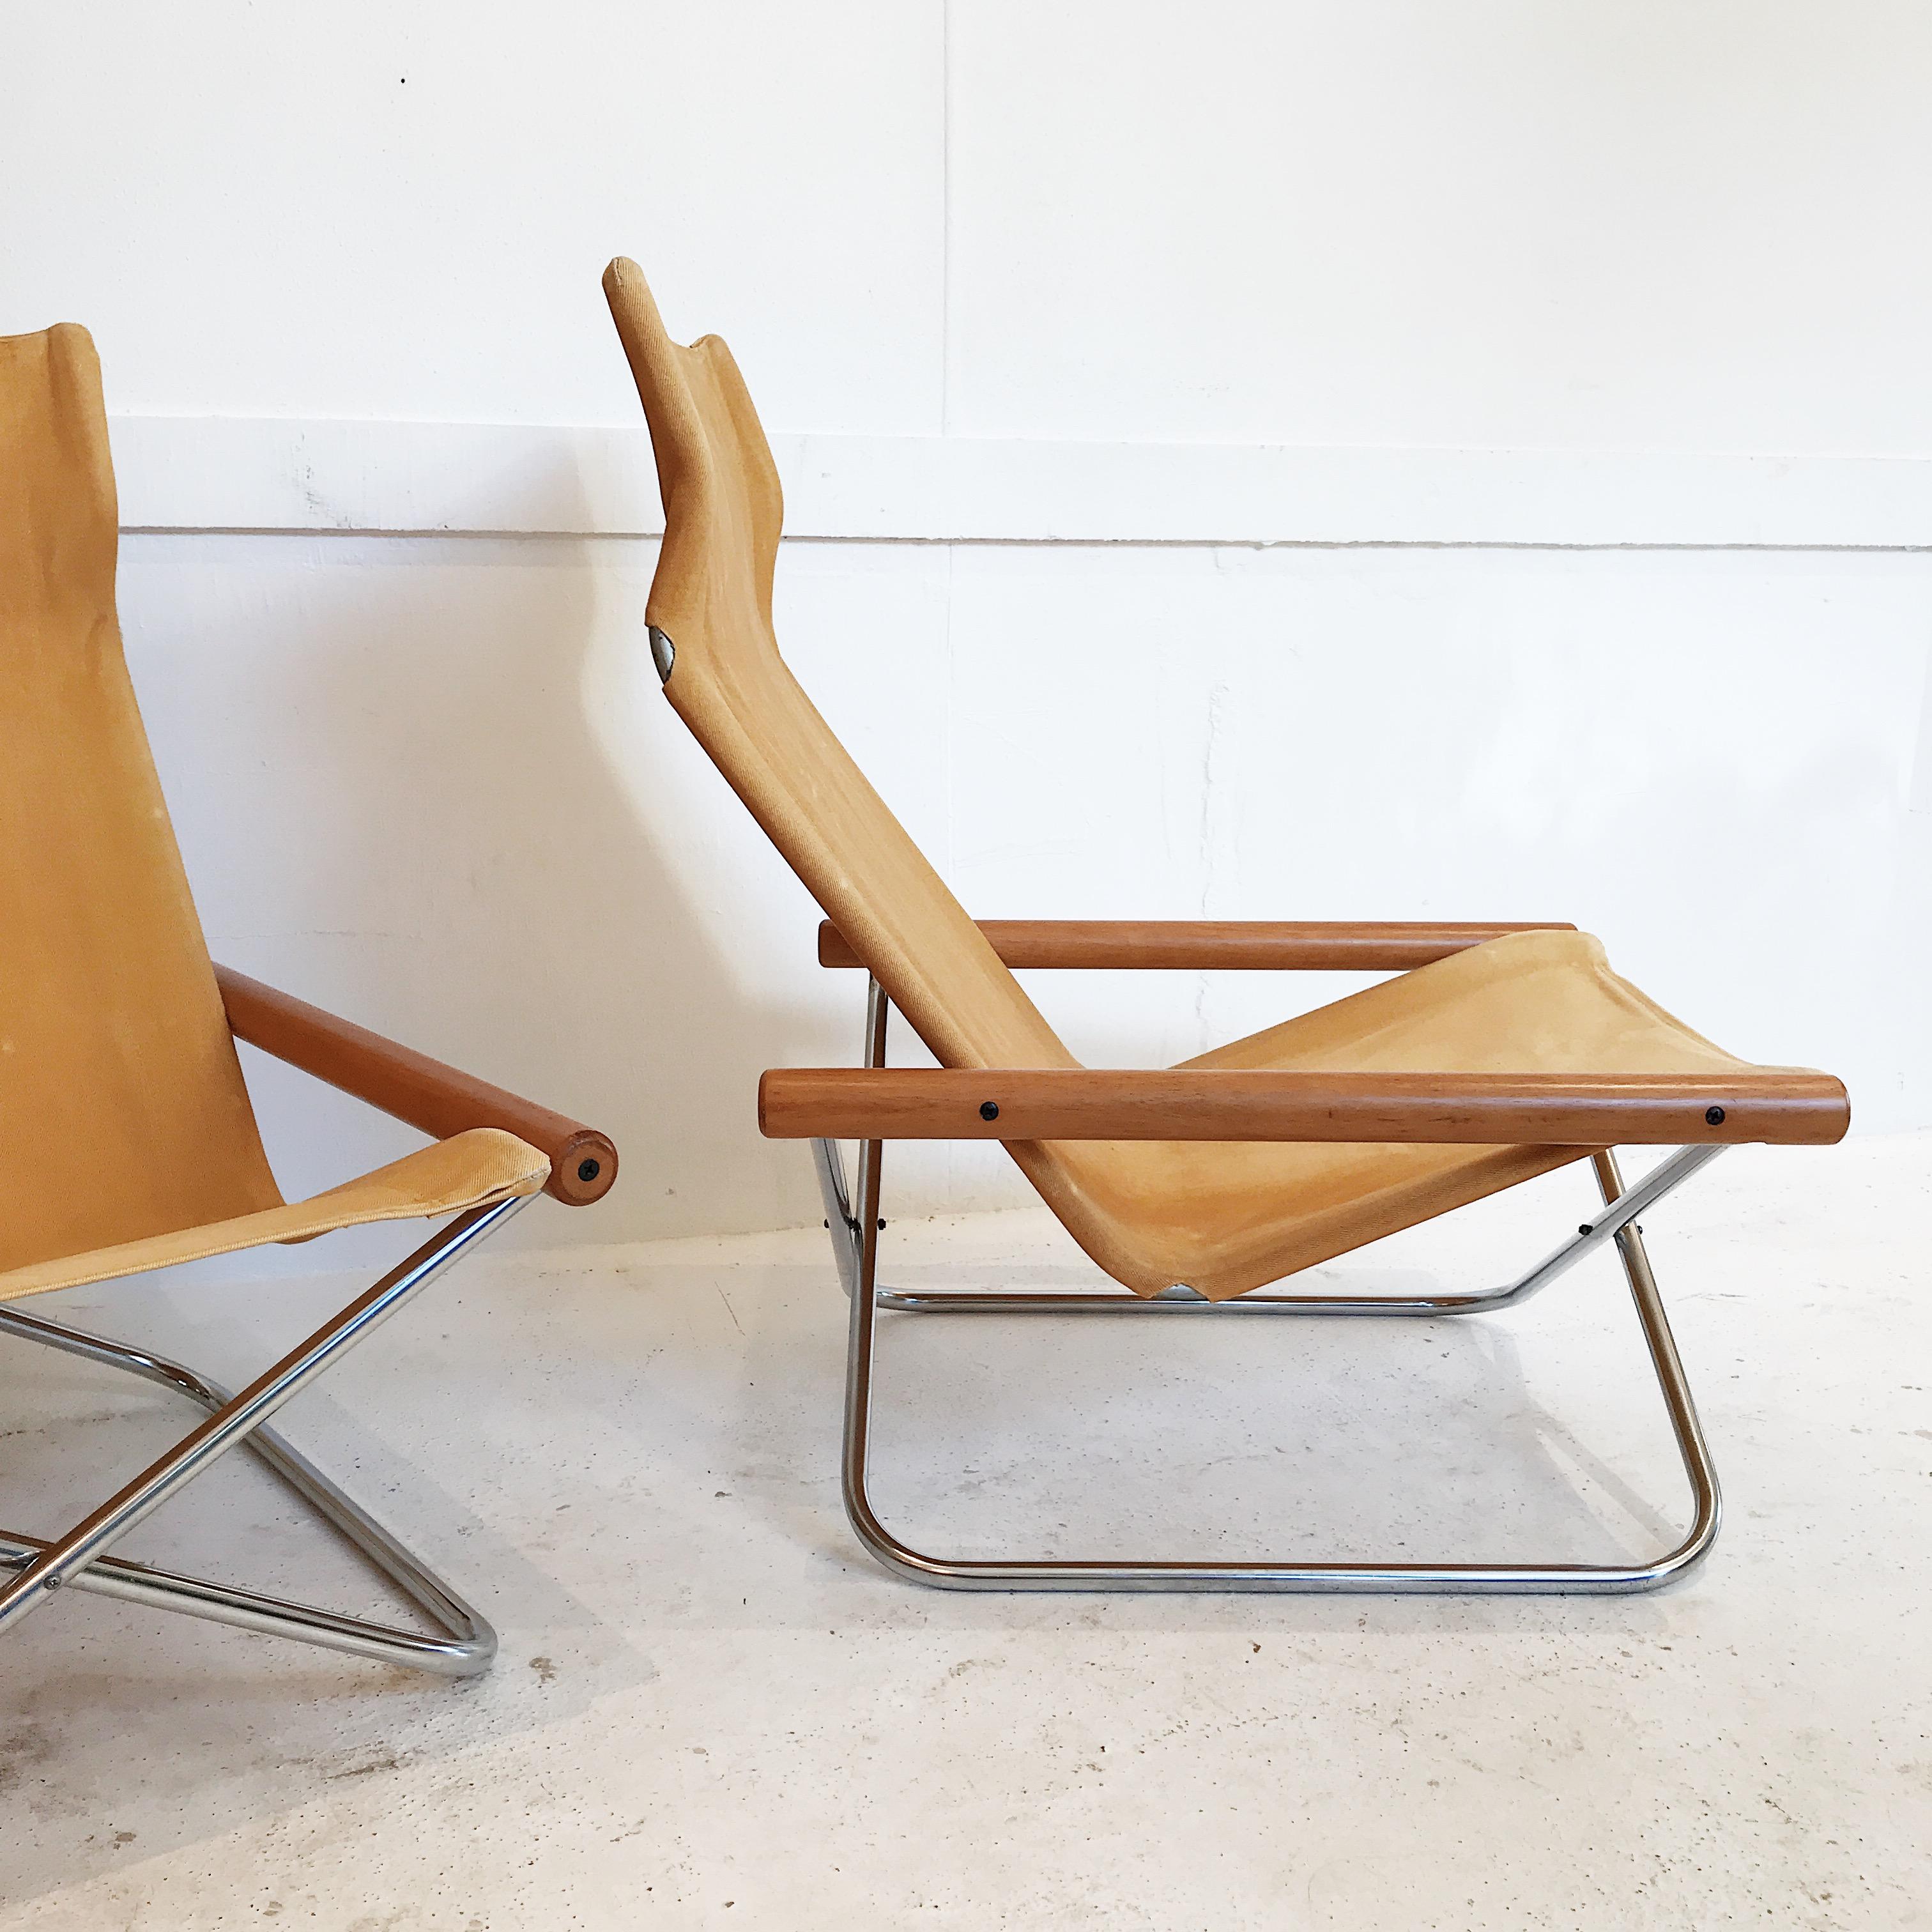 A vintage all original pair of NY chairs by Takeshi Nii, designed in 1958, for Trend Pacific Inc, Japan. The canvas 